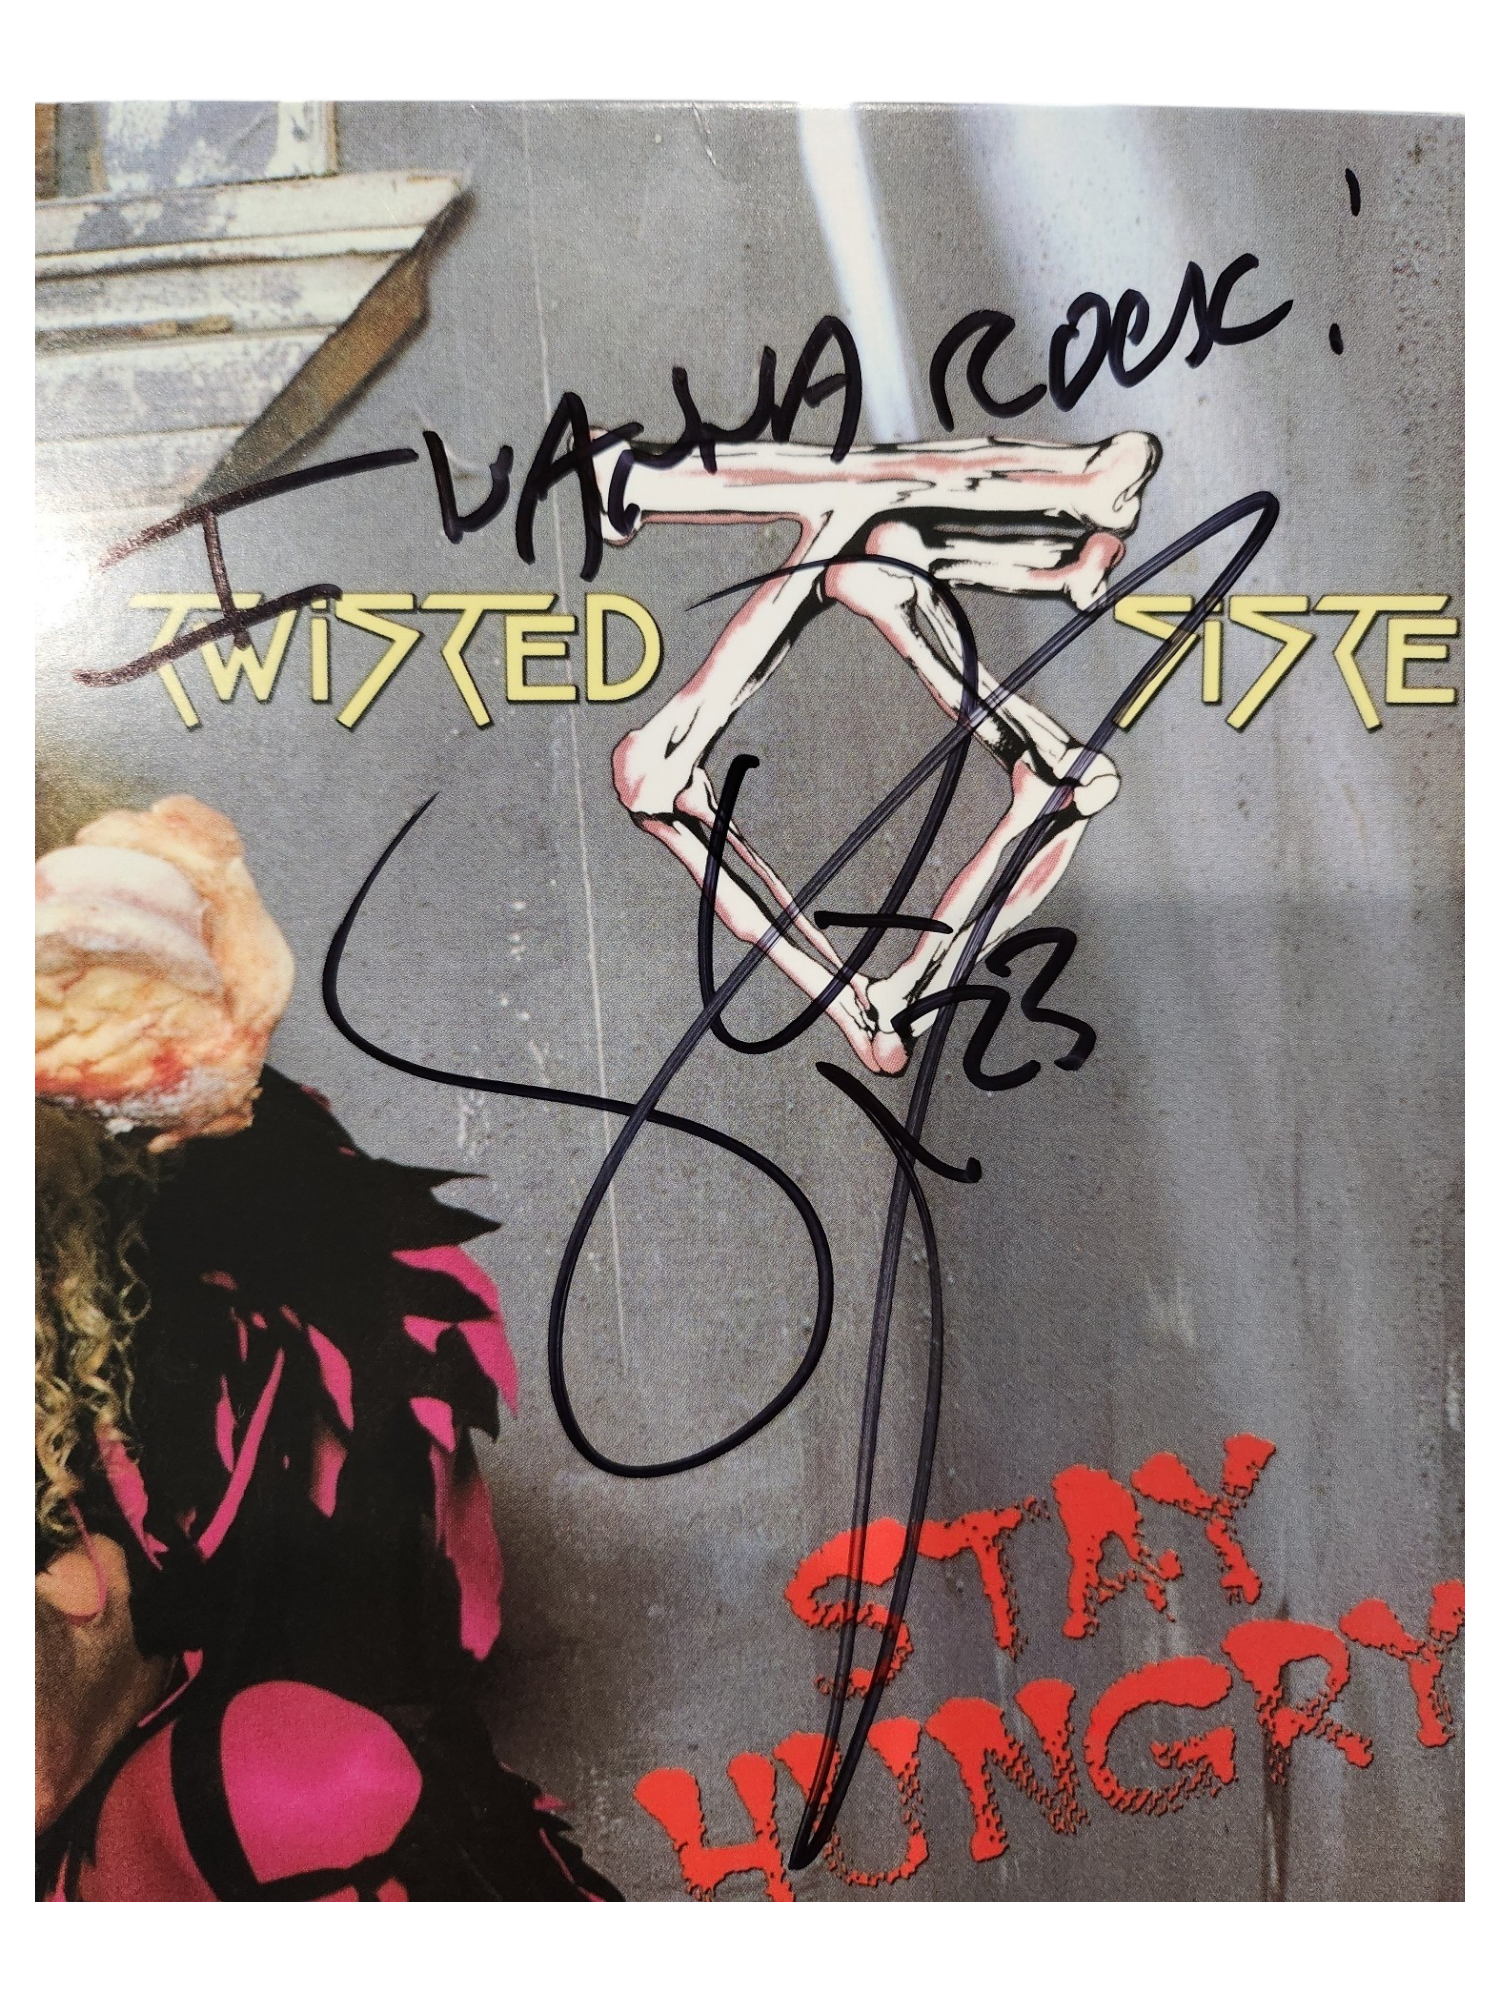 Stay Hungry Twisted Sister Vinyl Signed by Dee Snider with Inscription "I Wanna Rock"